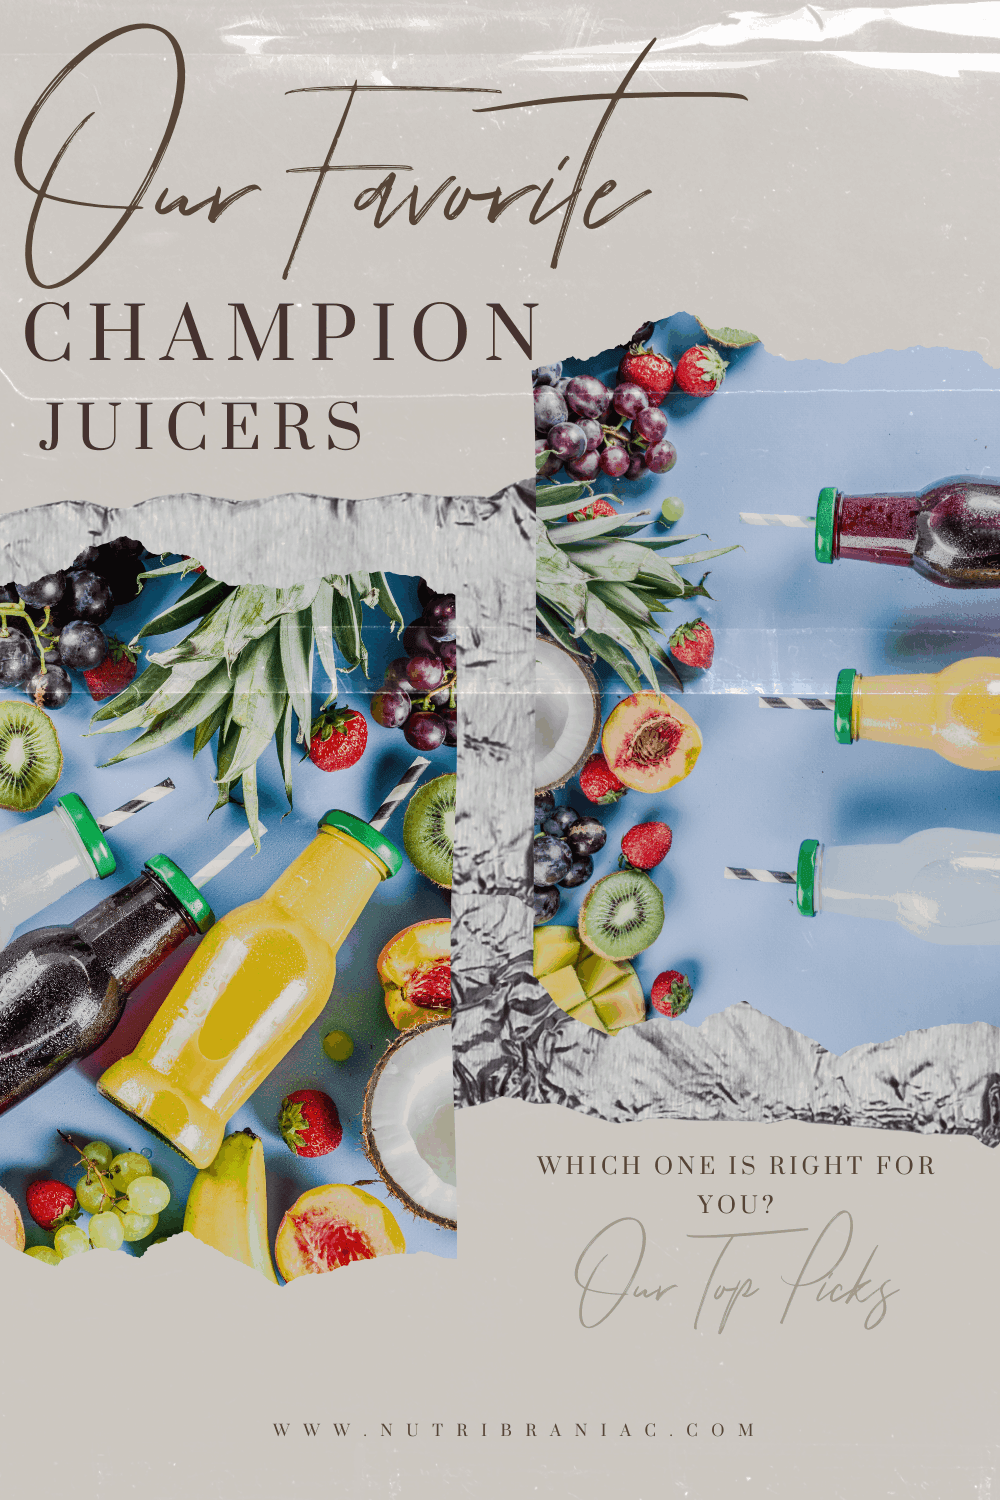 Image of fruit juices surround by tropic fruit with text overlay "Our Favorite Champion Juicers" 